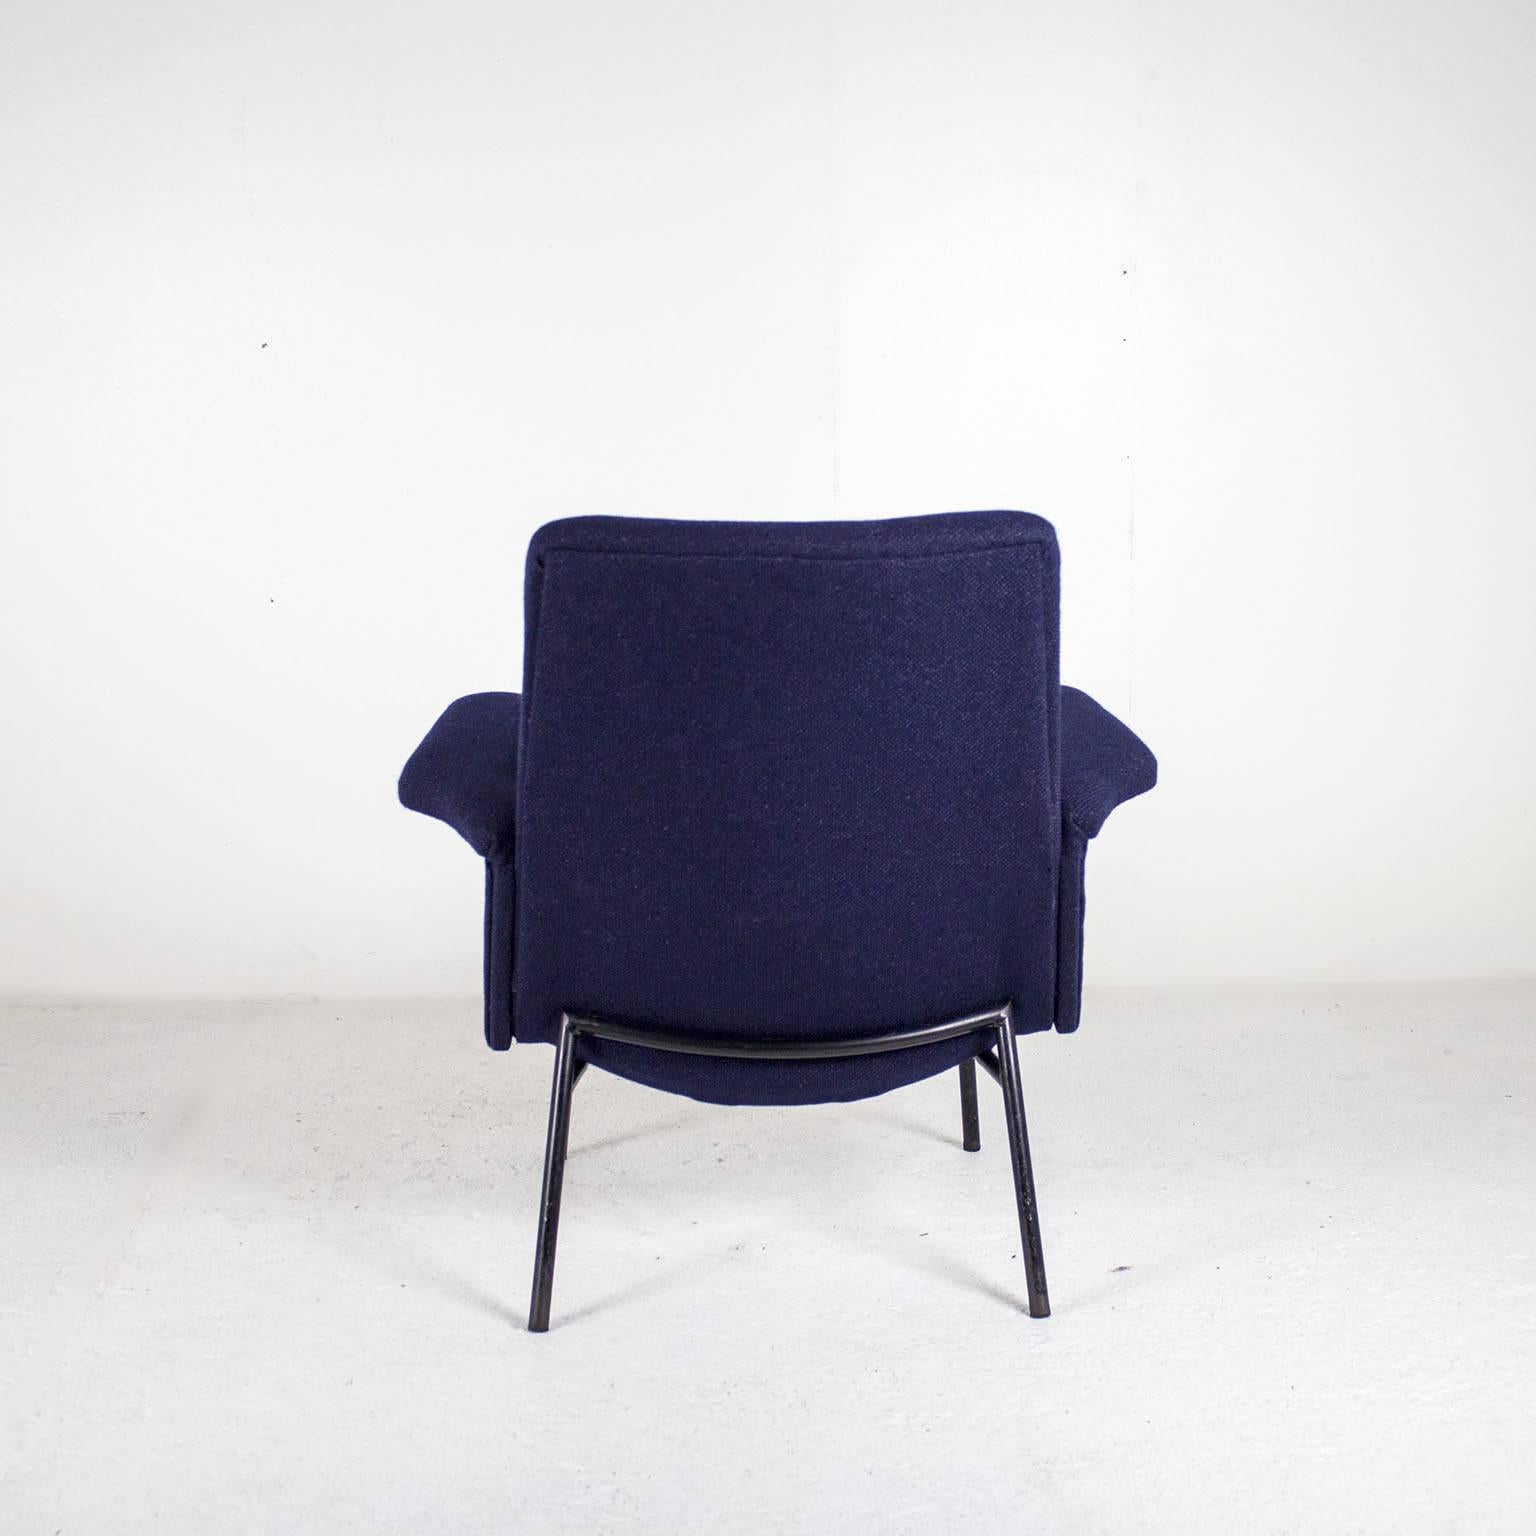 Pair of Armchairs SK660 by Pierre Guariche for Steiner, 1950 In Good Condition For Sale In Toulouse, France